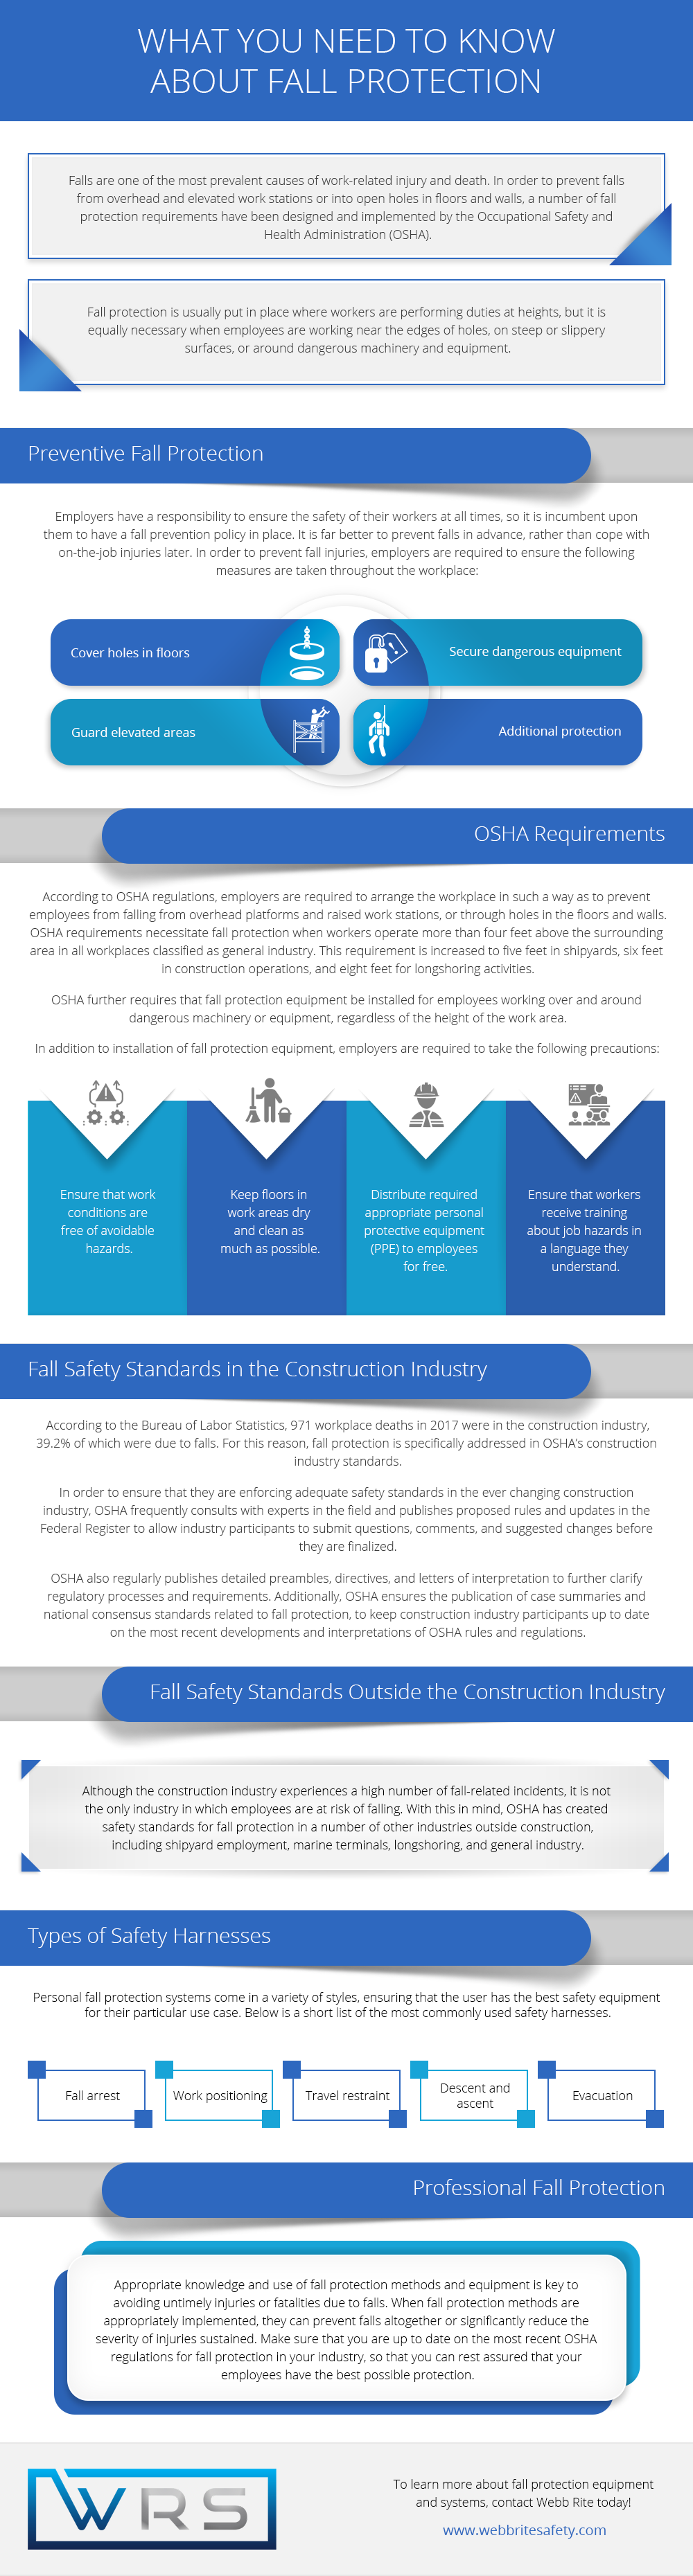 How to Address Safety Concerns with Your Employer - Fall